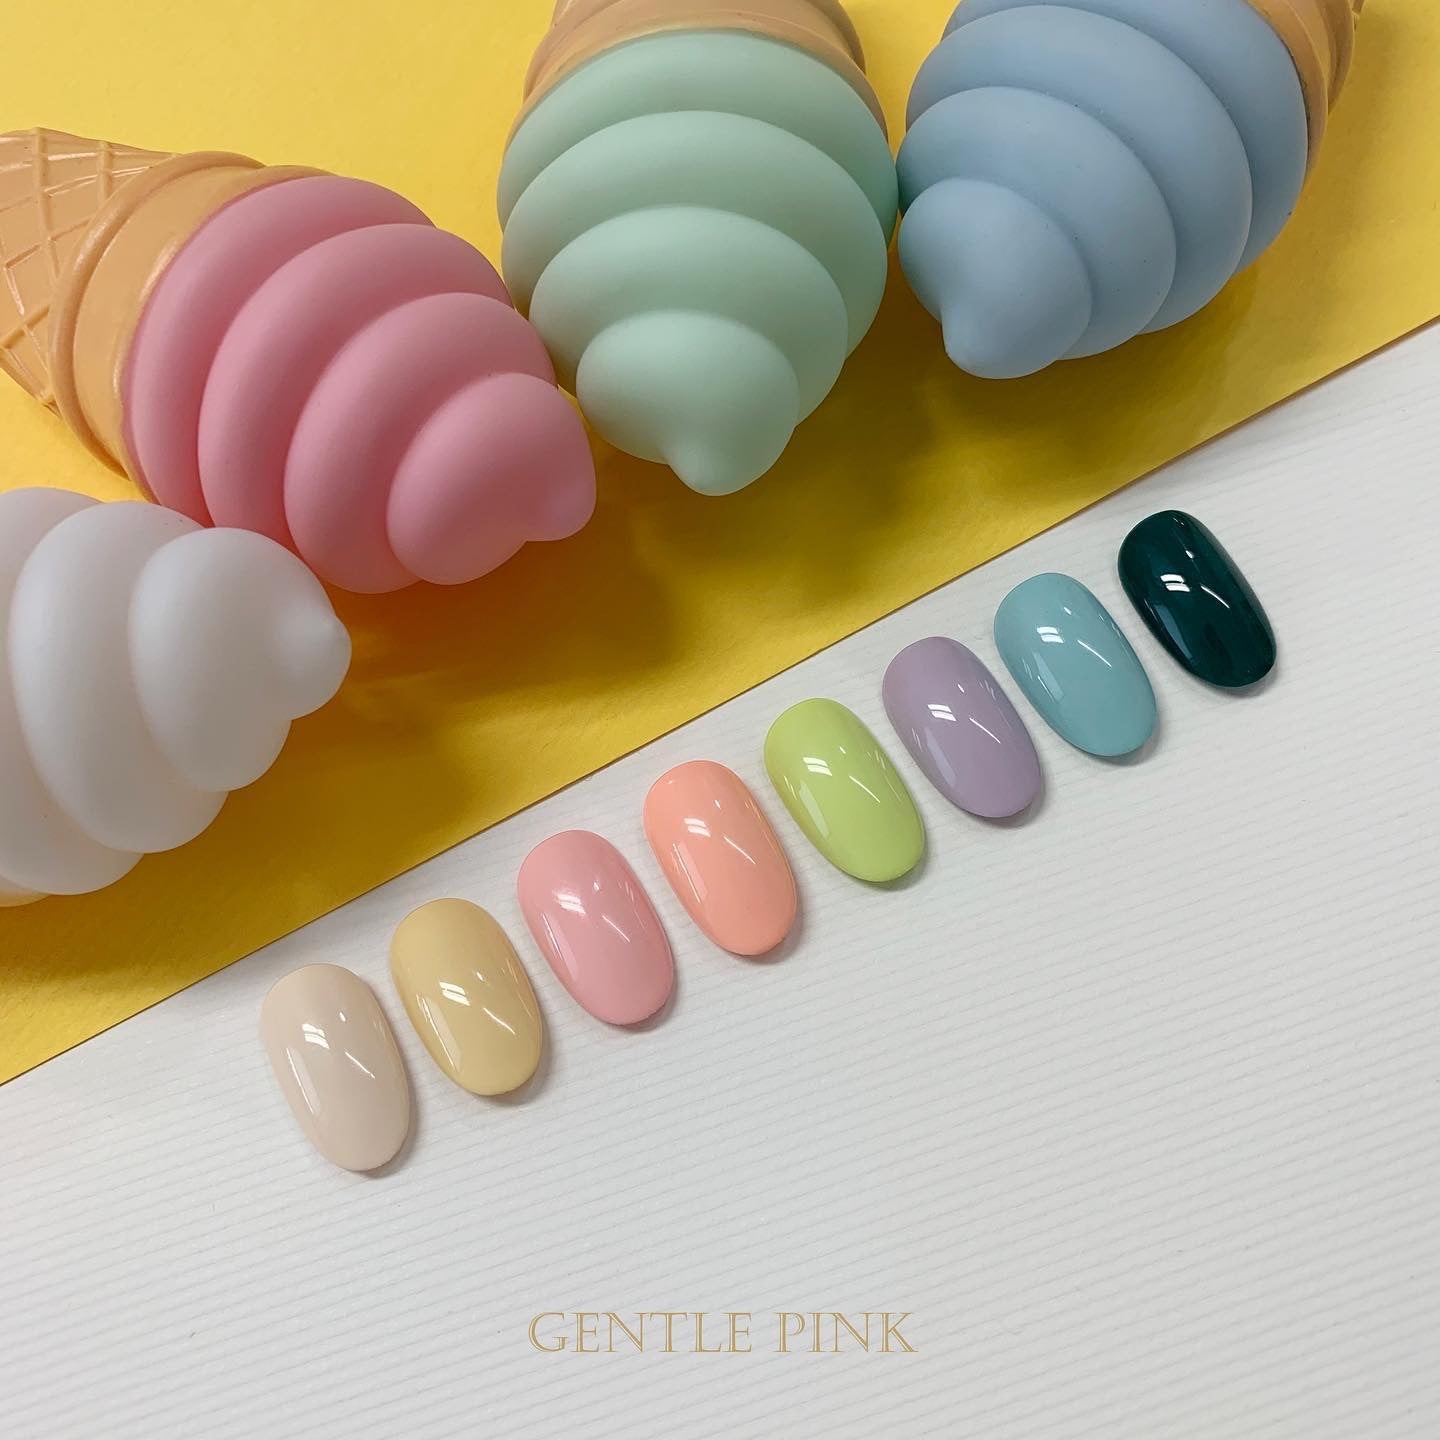 GENTLE PINK Acoustic Romance collection / individual